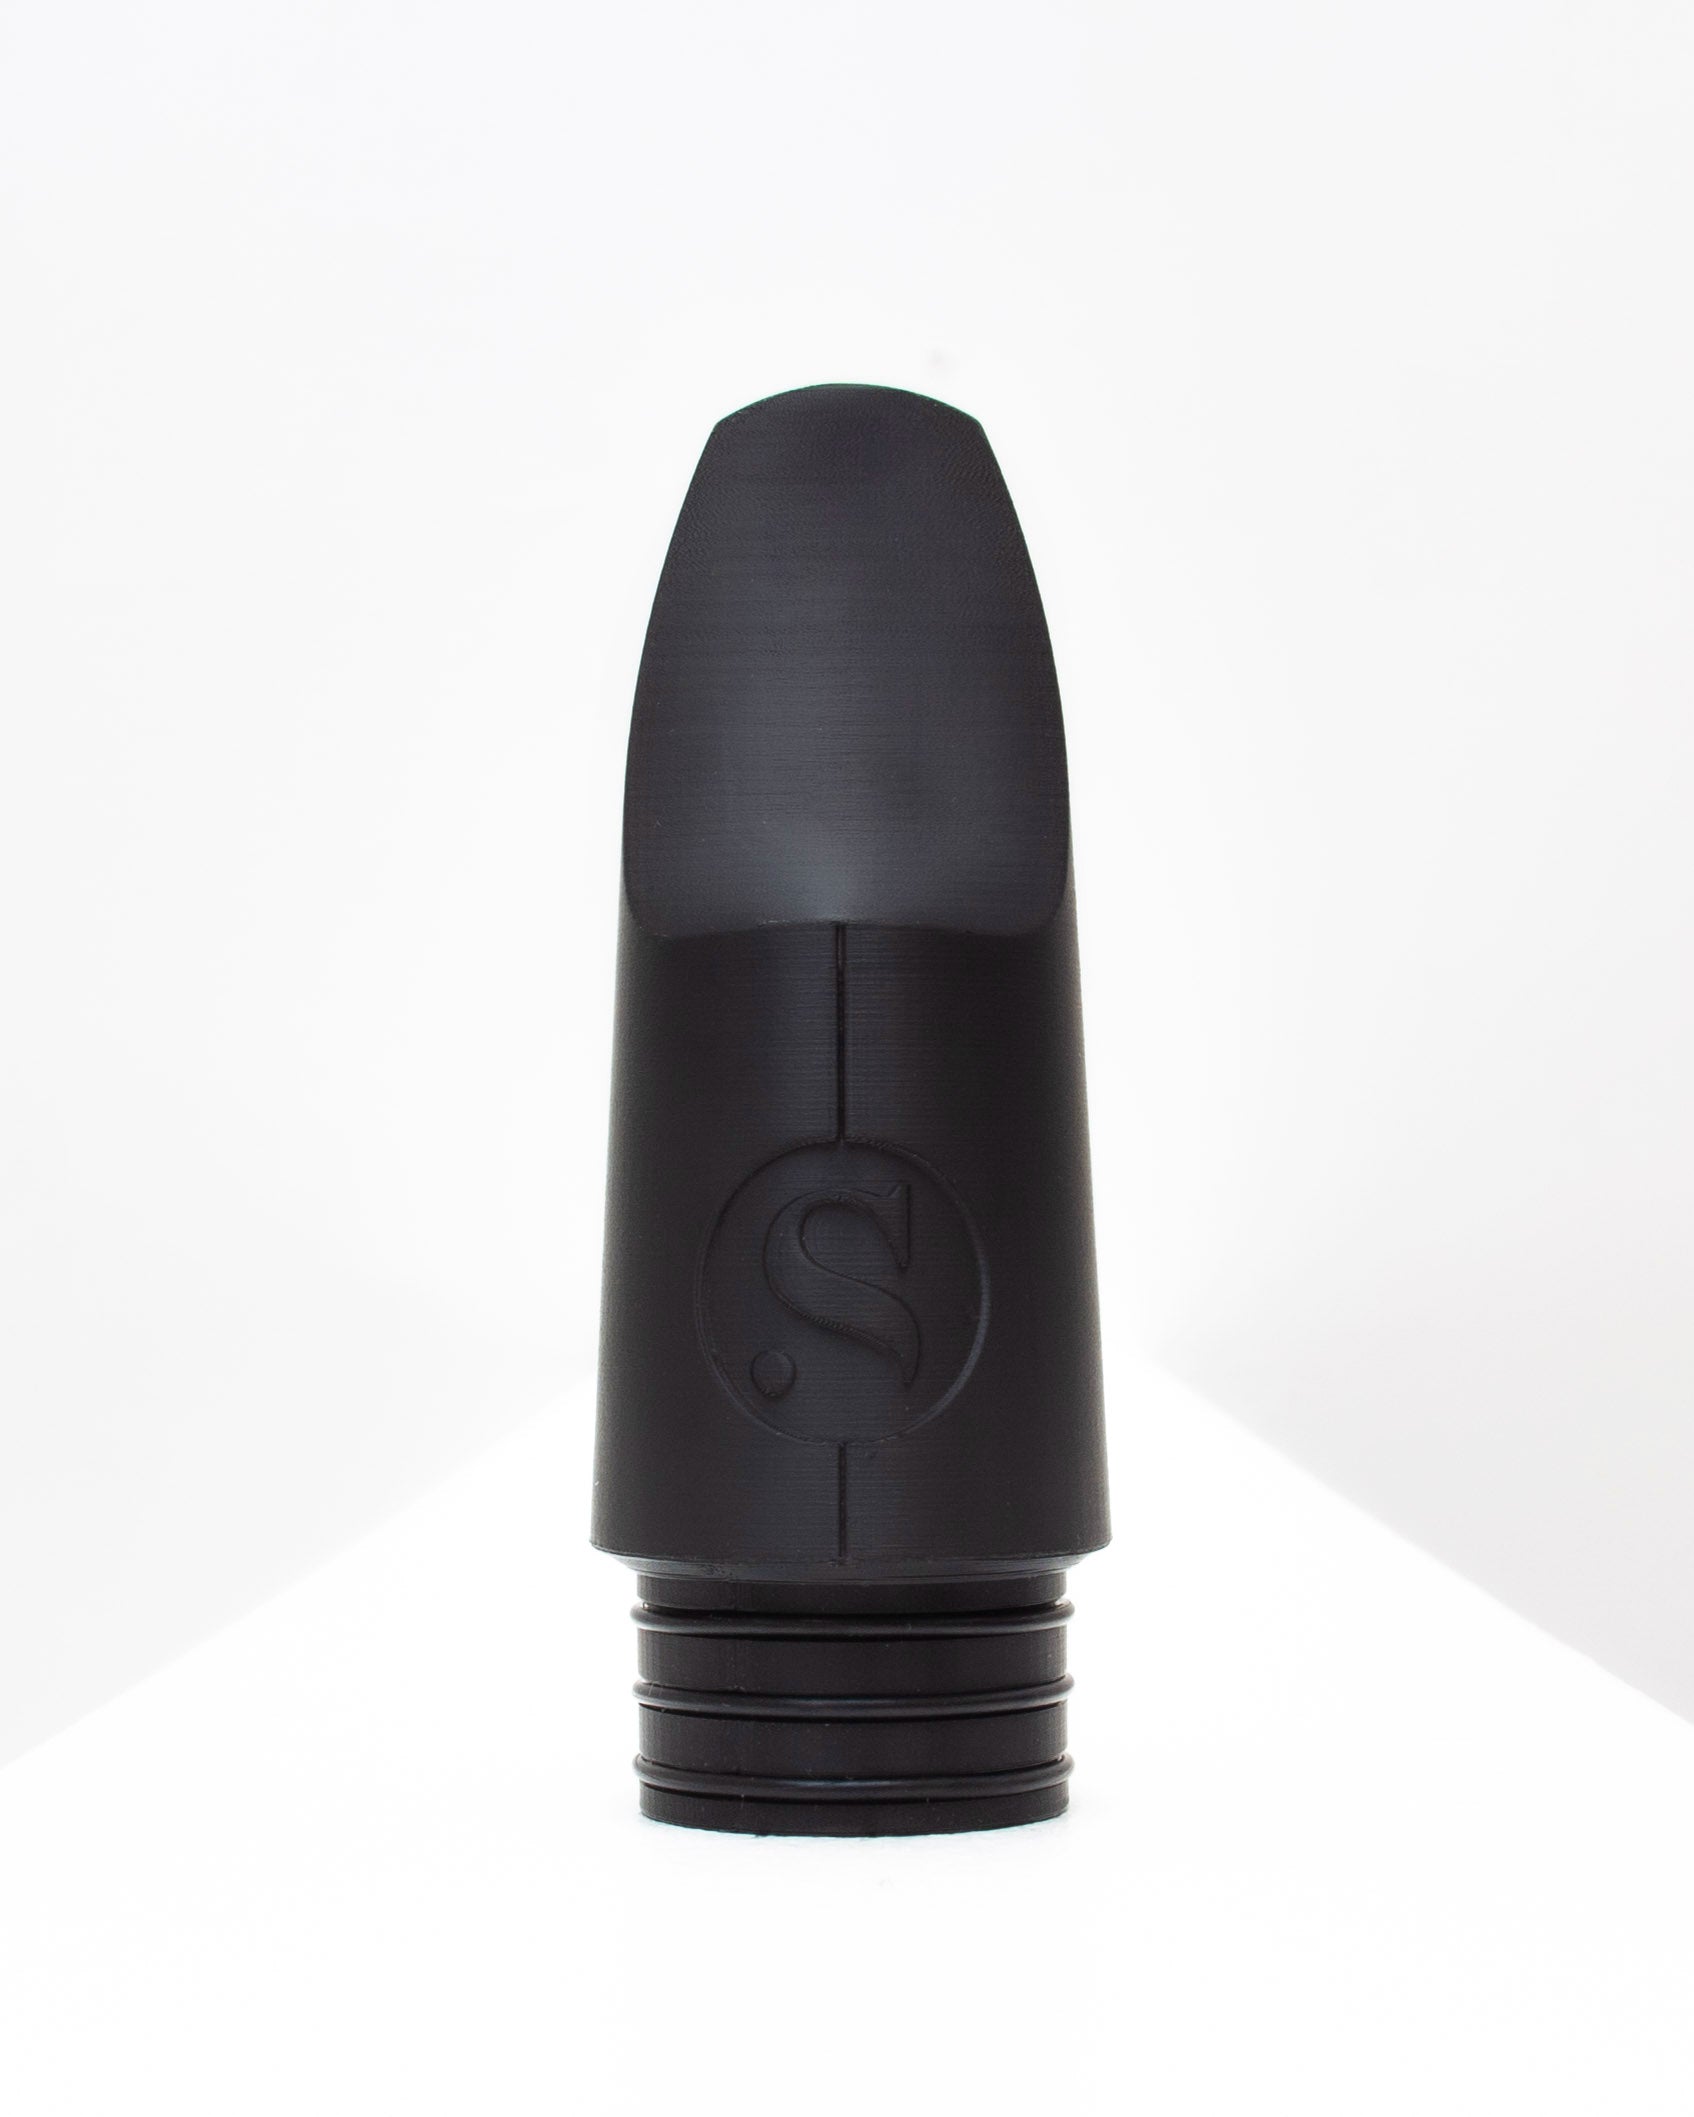 Bass Originals Clarinet mouthpiece - Spark by Syos - 8 / Pitch Black